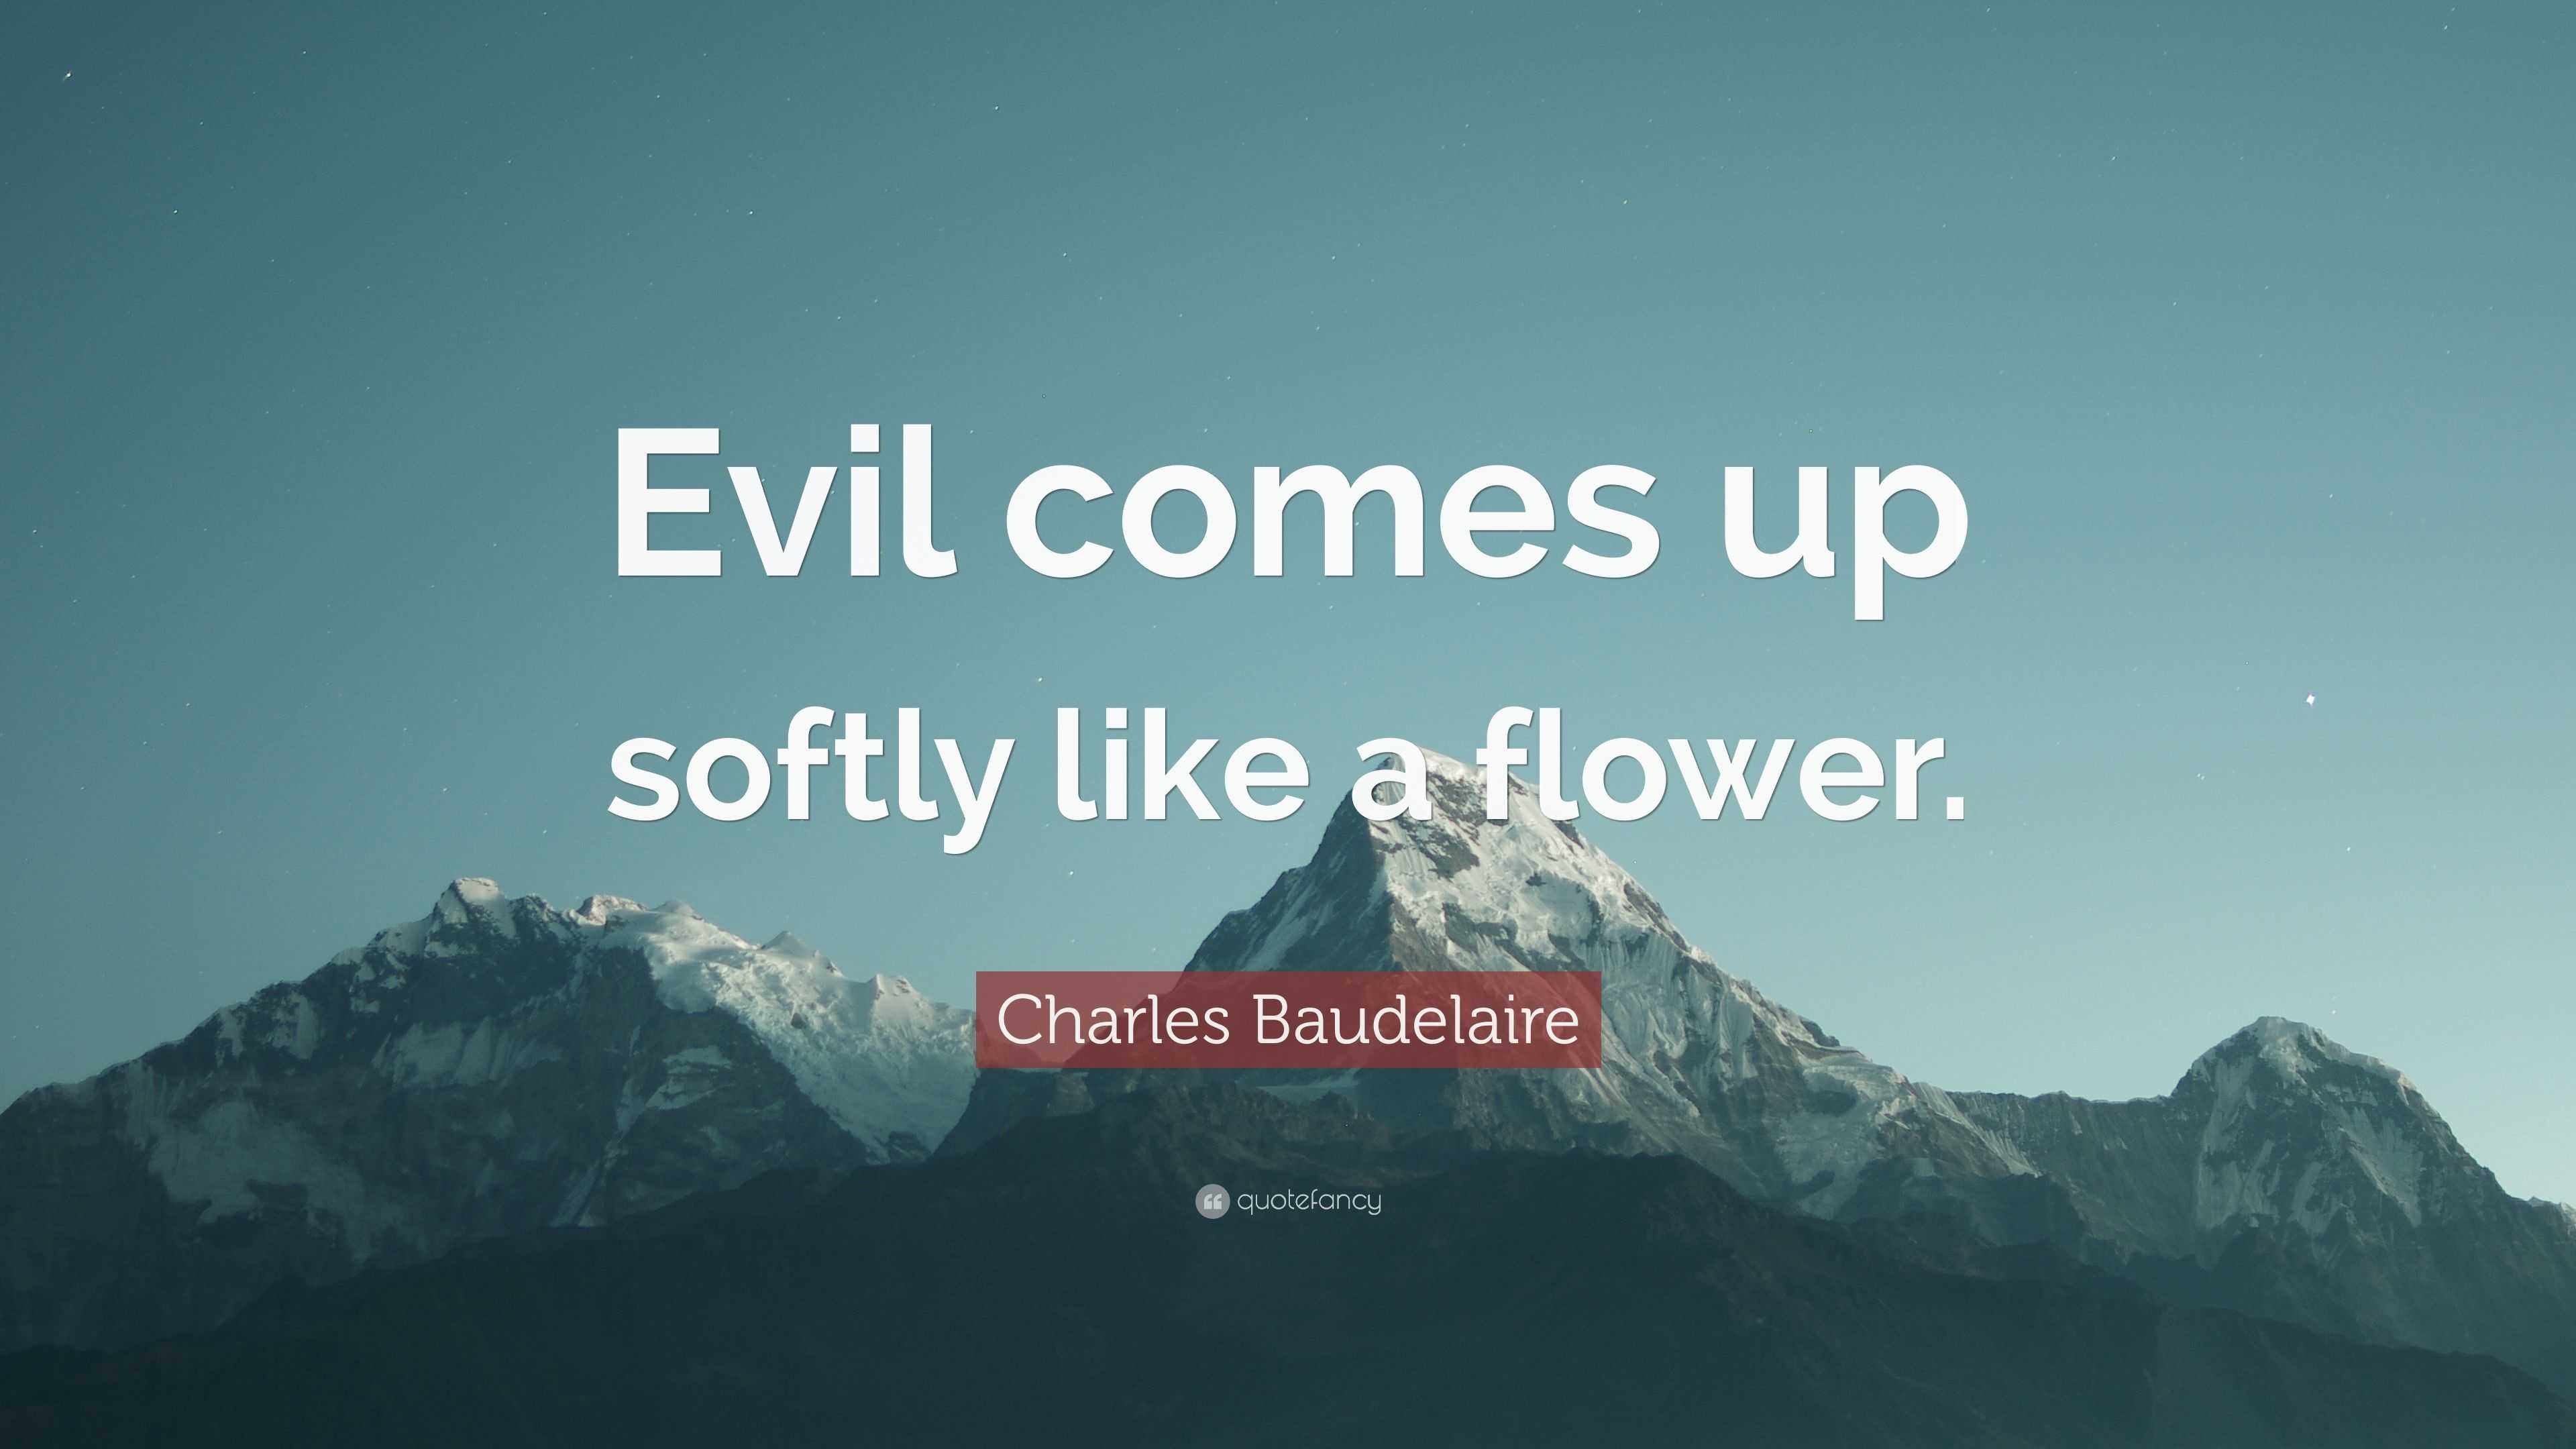 Charles Baudelaire Quote: “Evil comes up softly like a flower.”